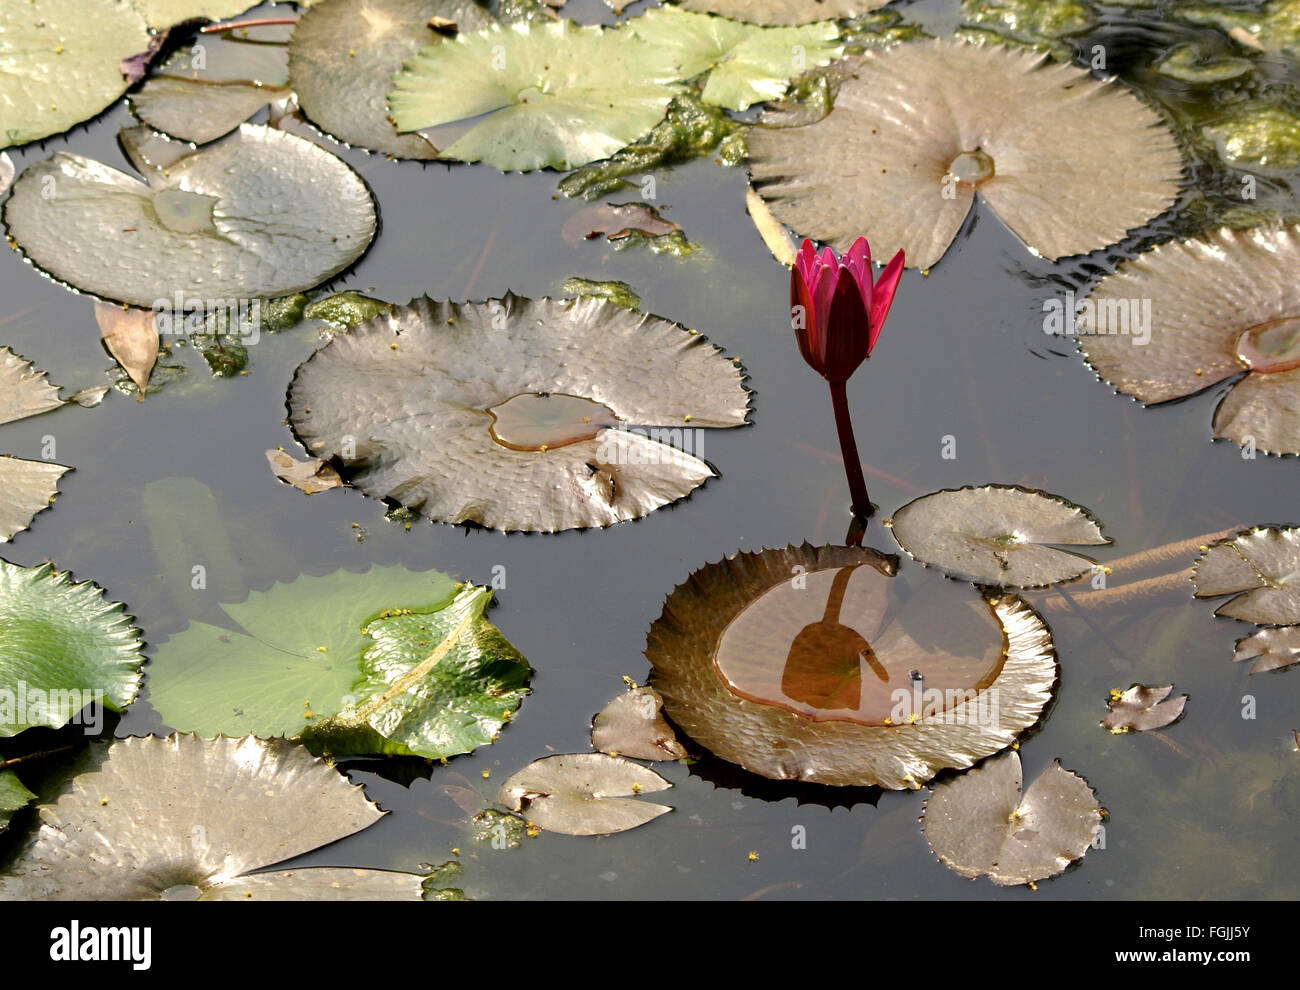 Nymphaea pubescens, hairy water-lily, pink water-lily, aquatic rhizomatous plant with rounded finely toothed leaves, pink flower Stock Photo